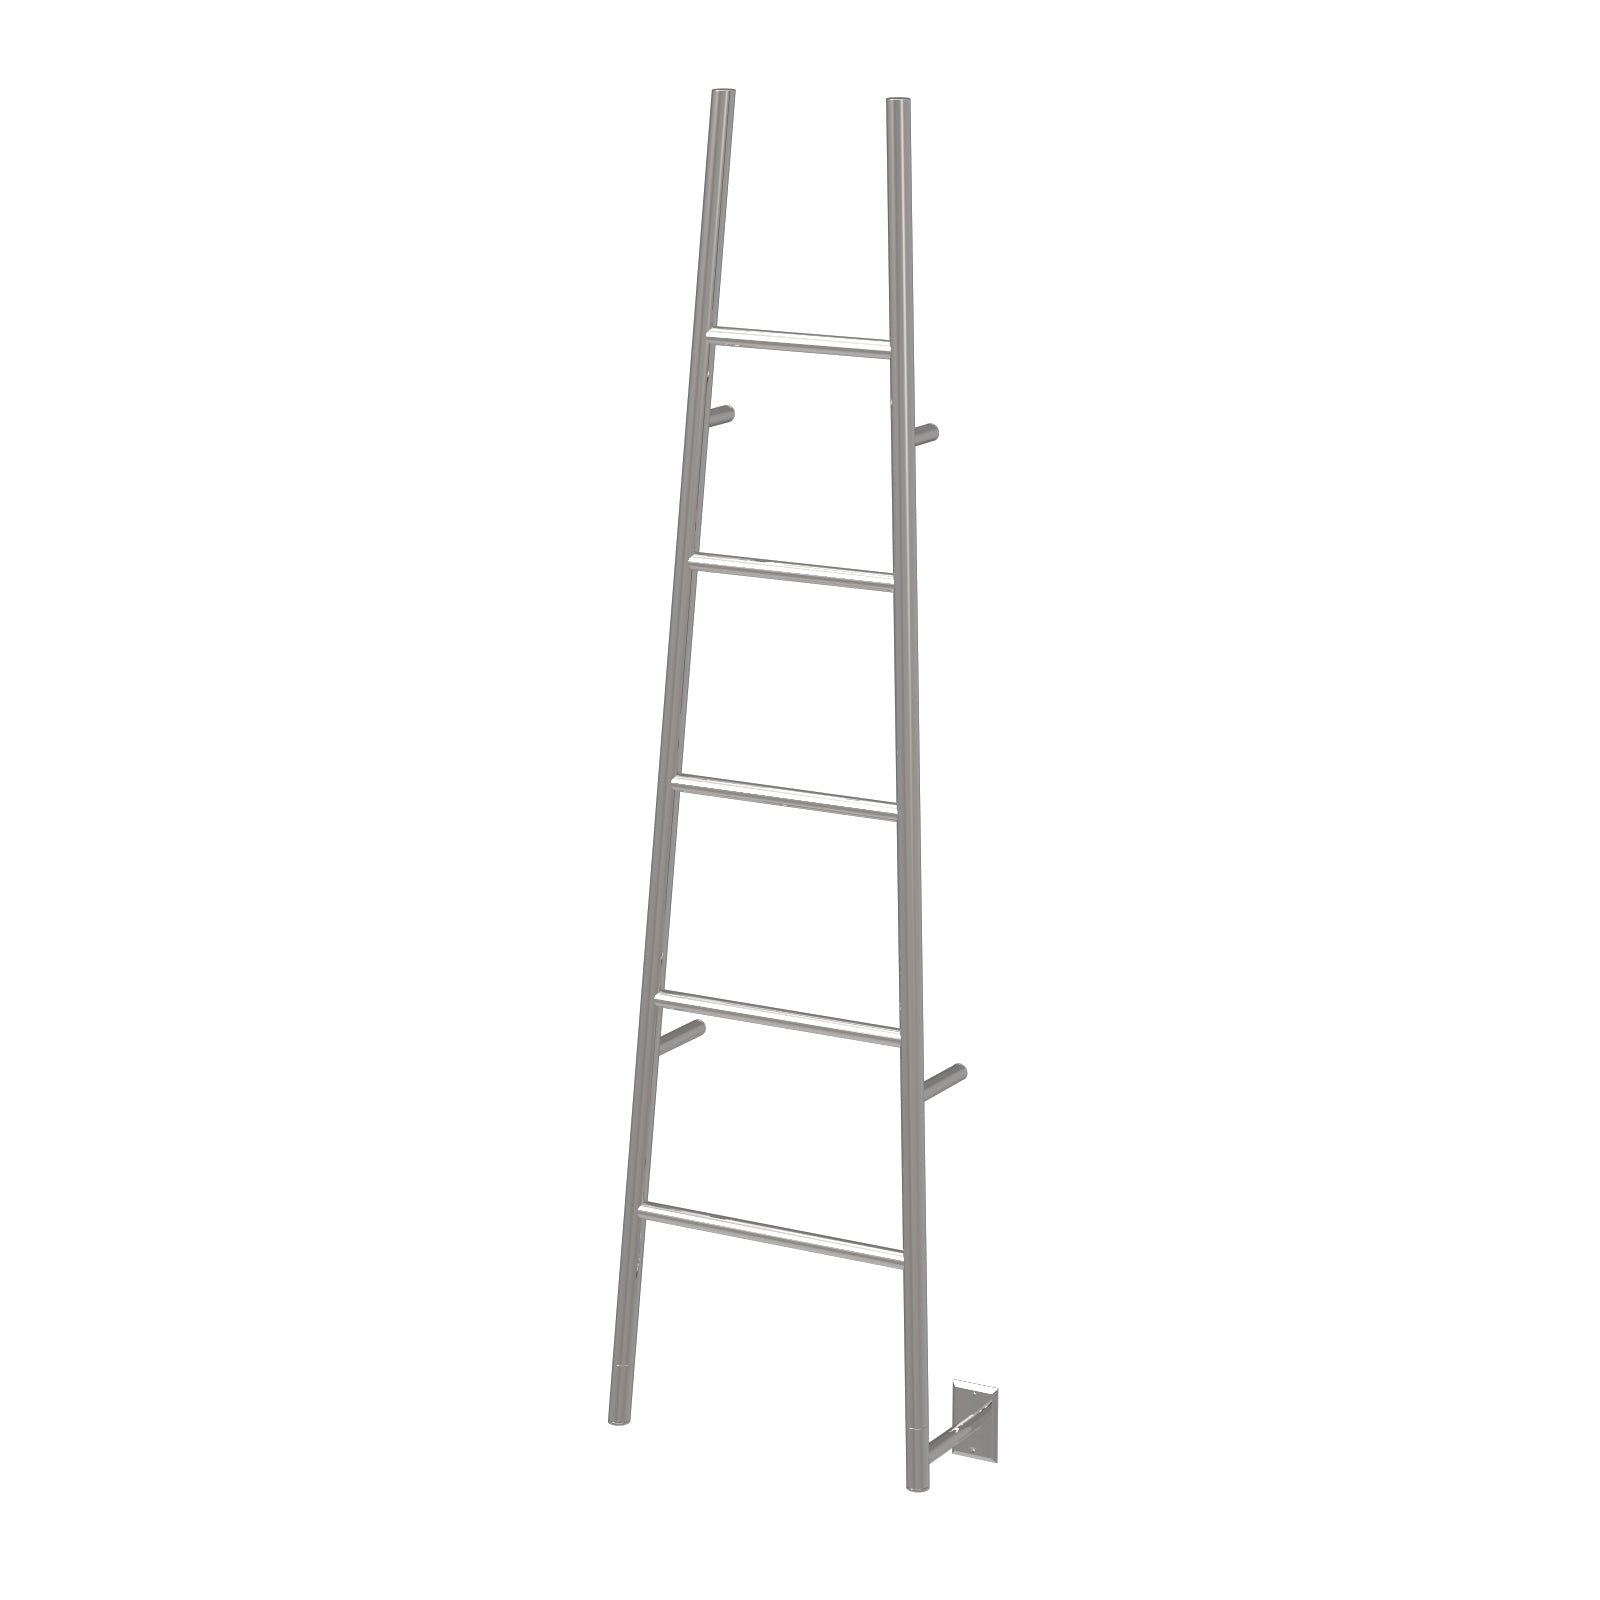 Amba Jeeves Model A Ladder 5 Bar Hardwired Drying Rack